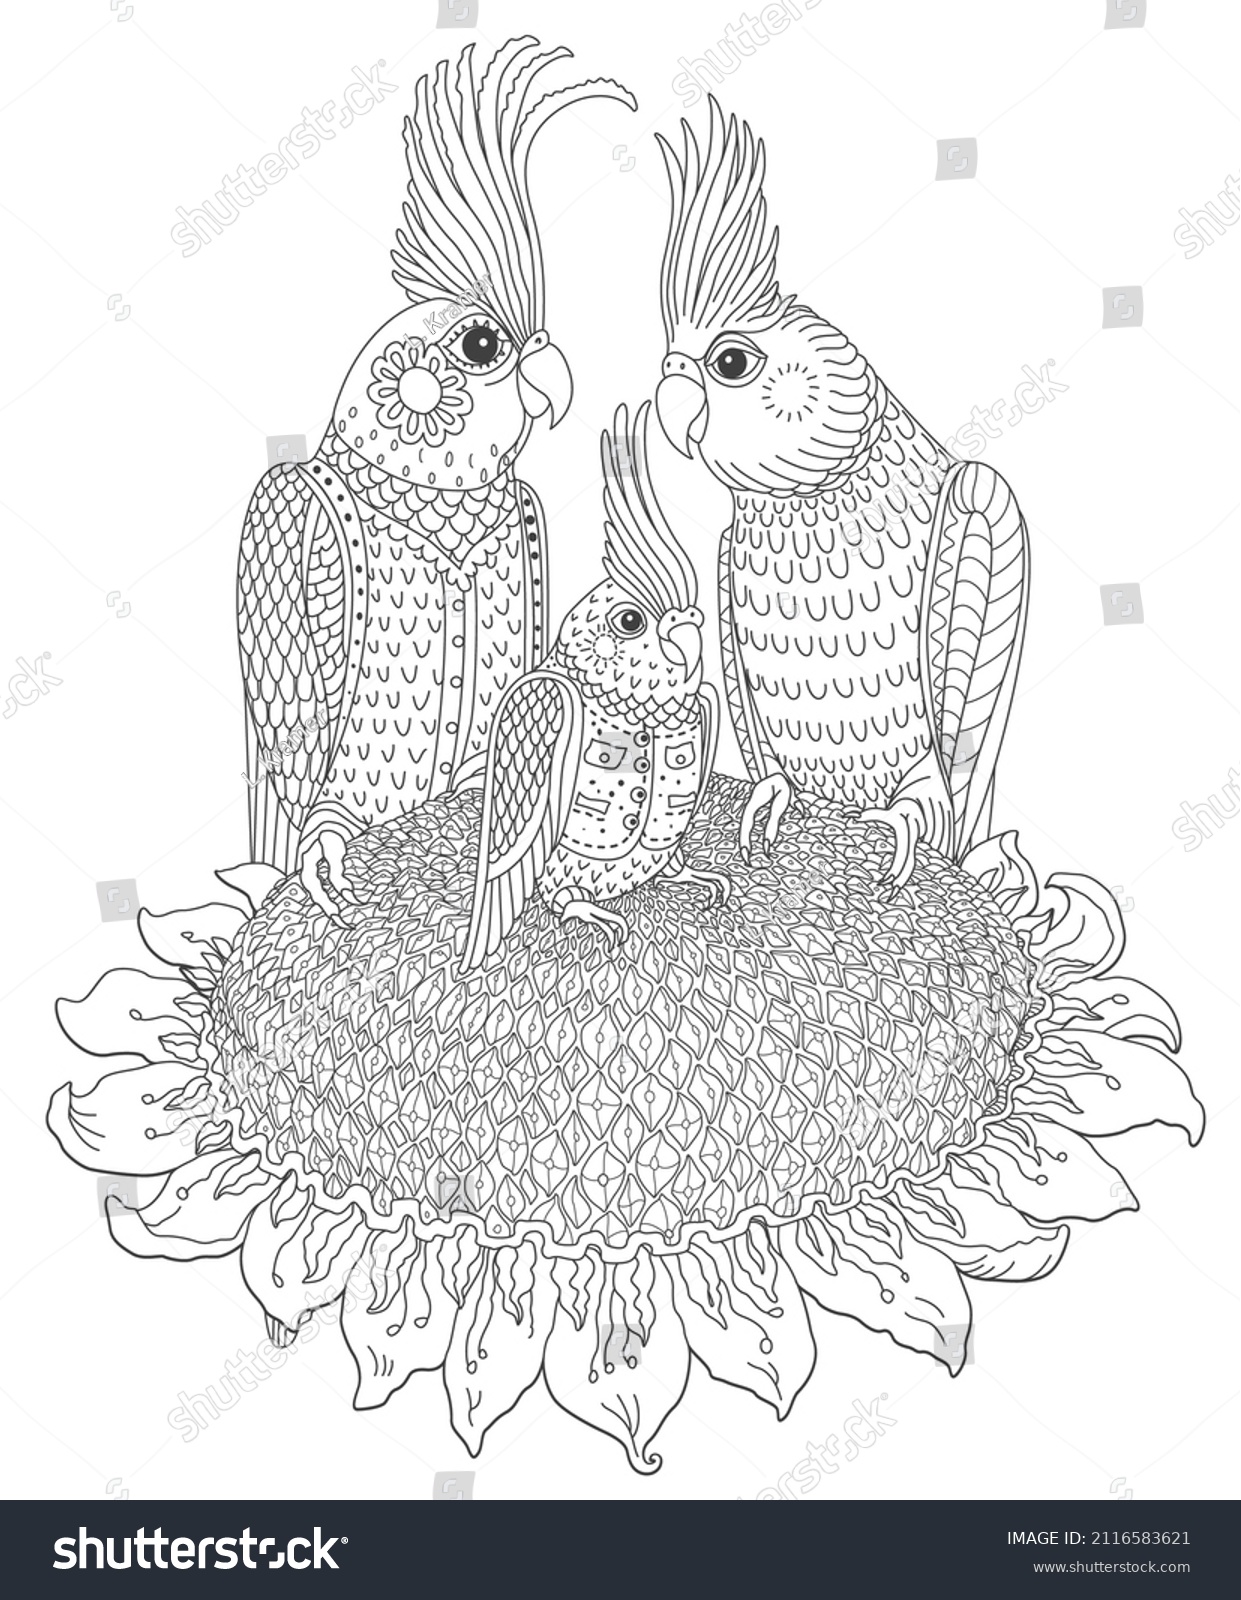 Thousand coloring pages bird adults royalty